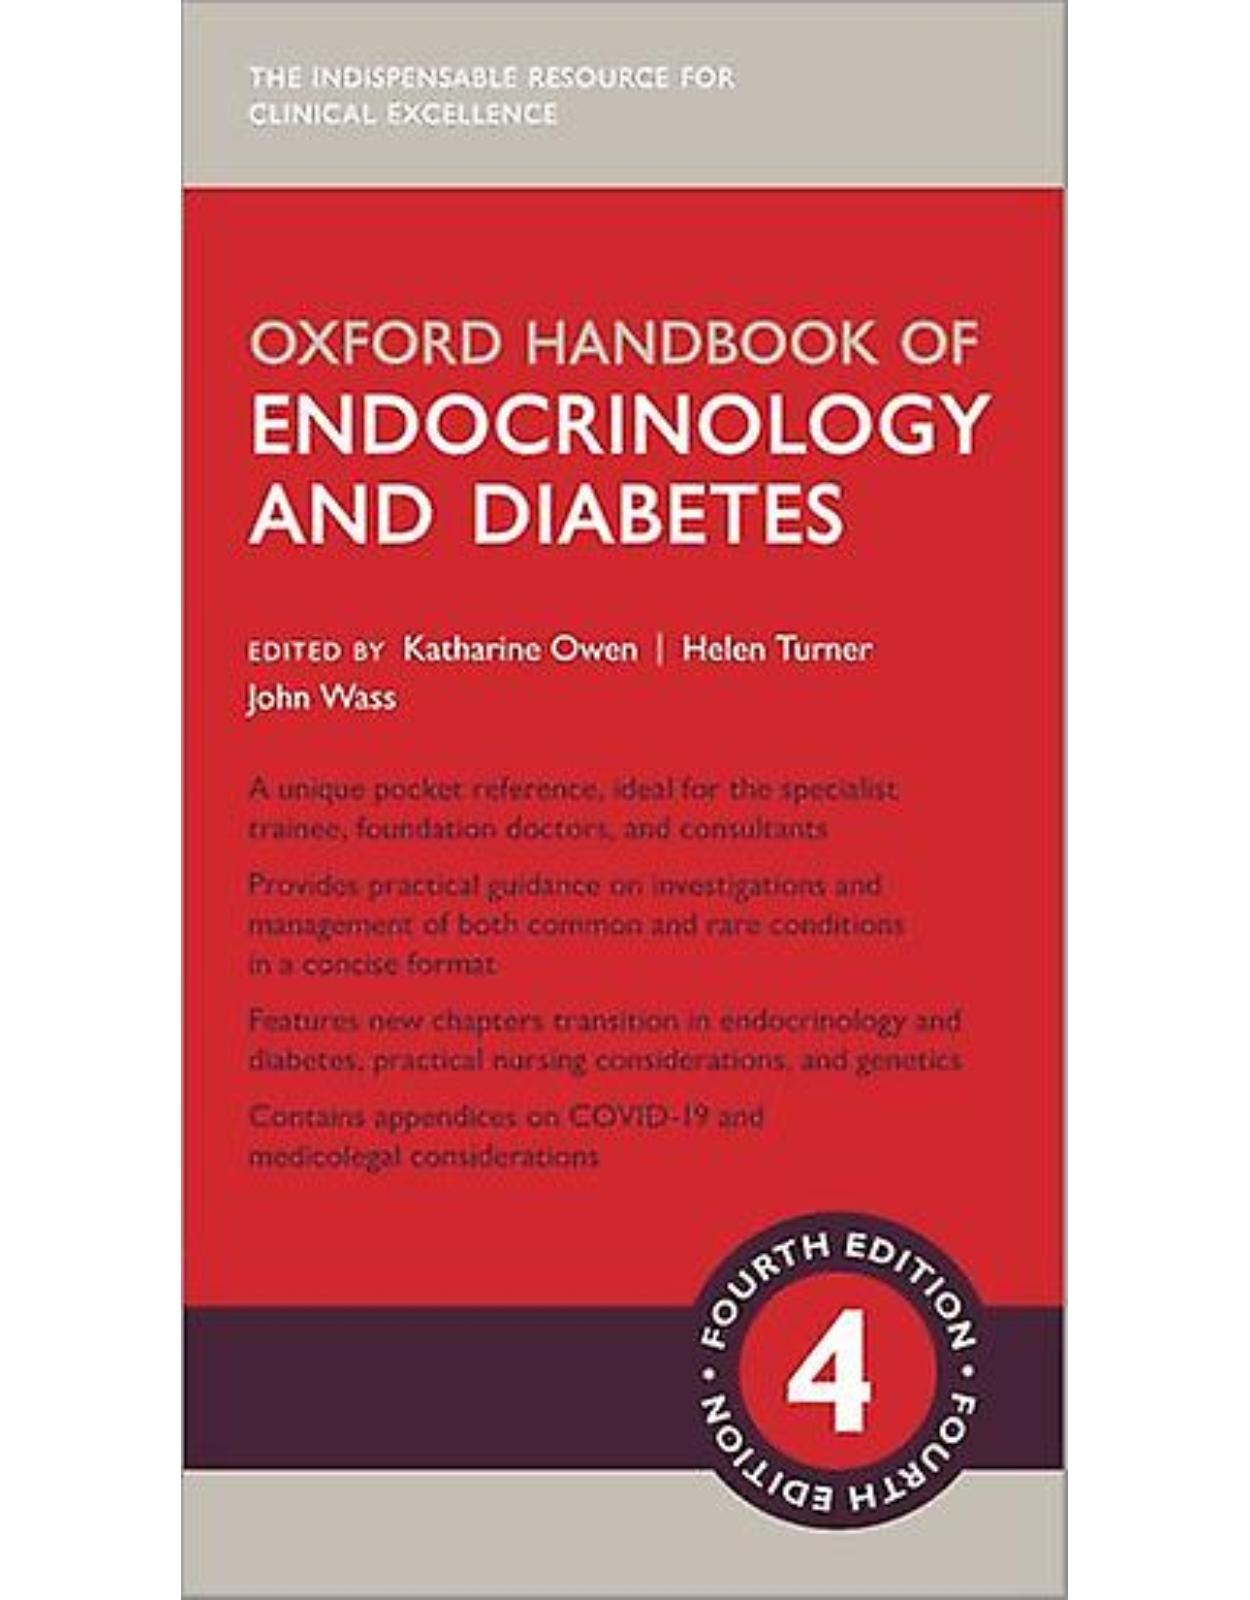 Oxford Handbook of Endocrinology and Diabetes- Fourth Edition